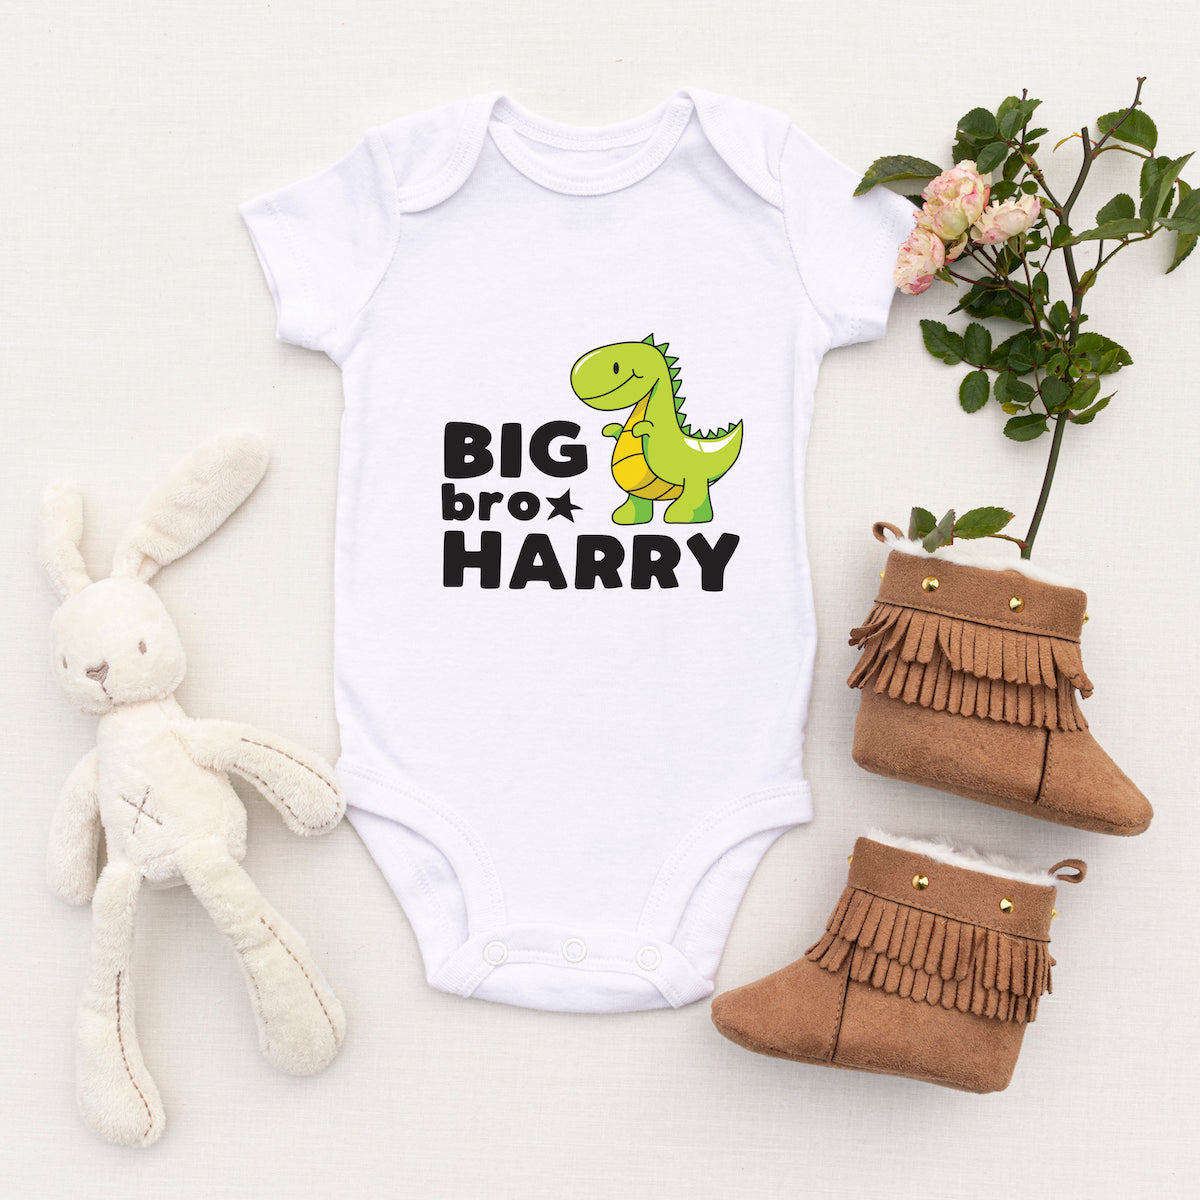 Personalised White Baby Body Suit Grow Vest - Dino